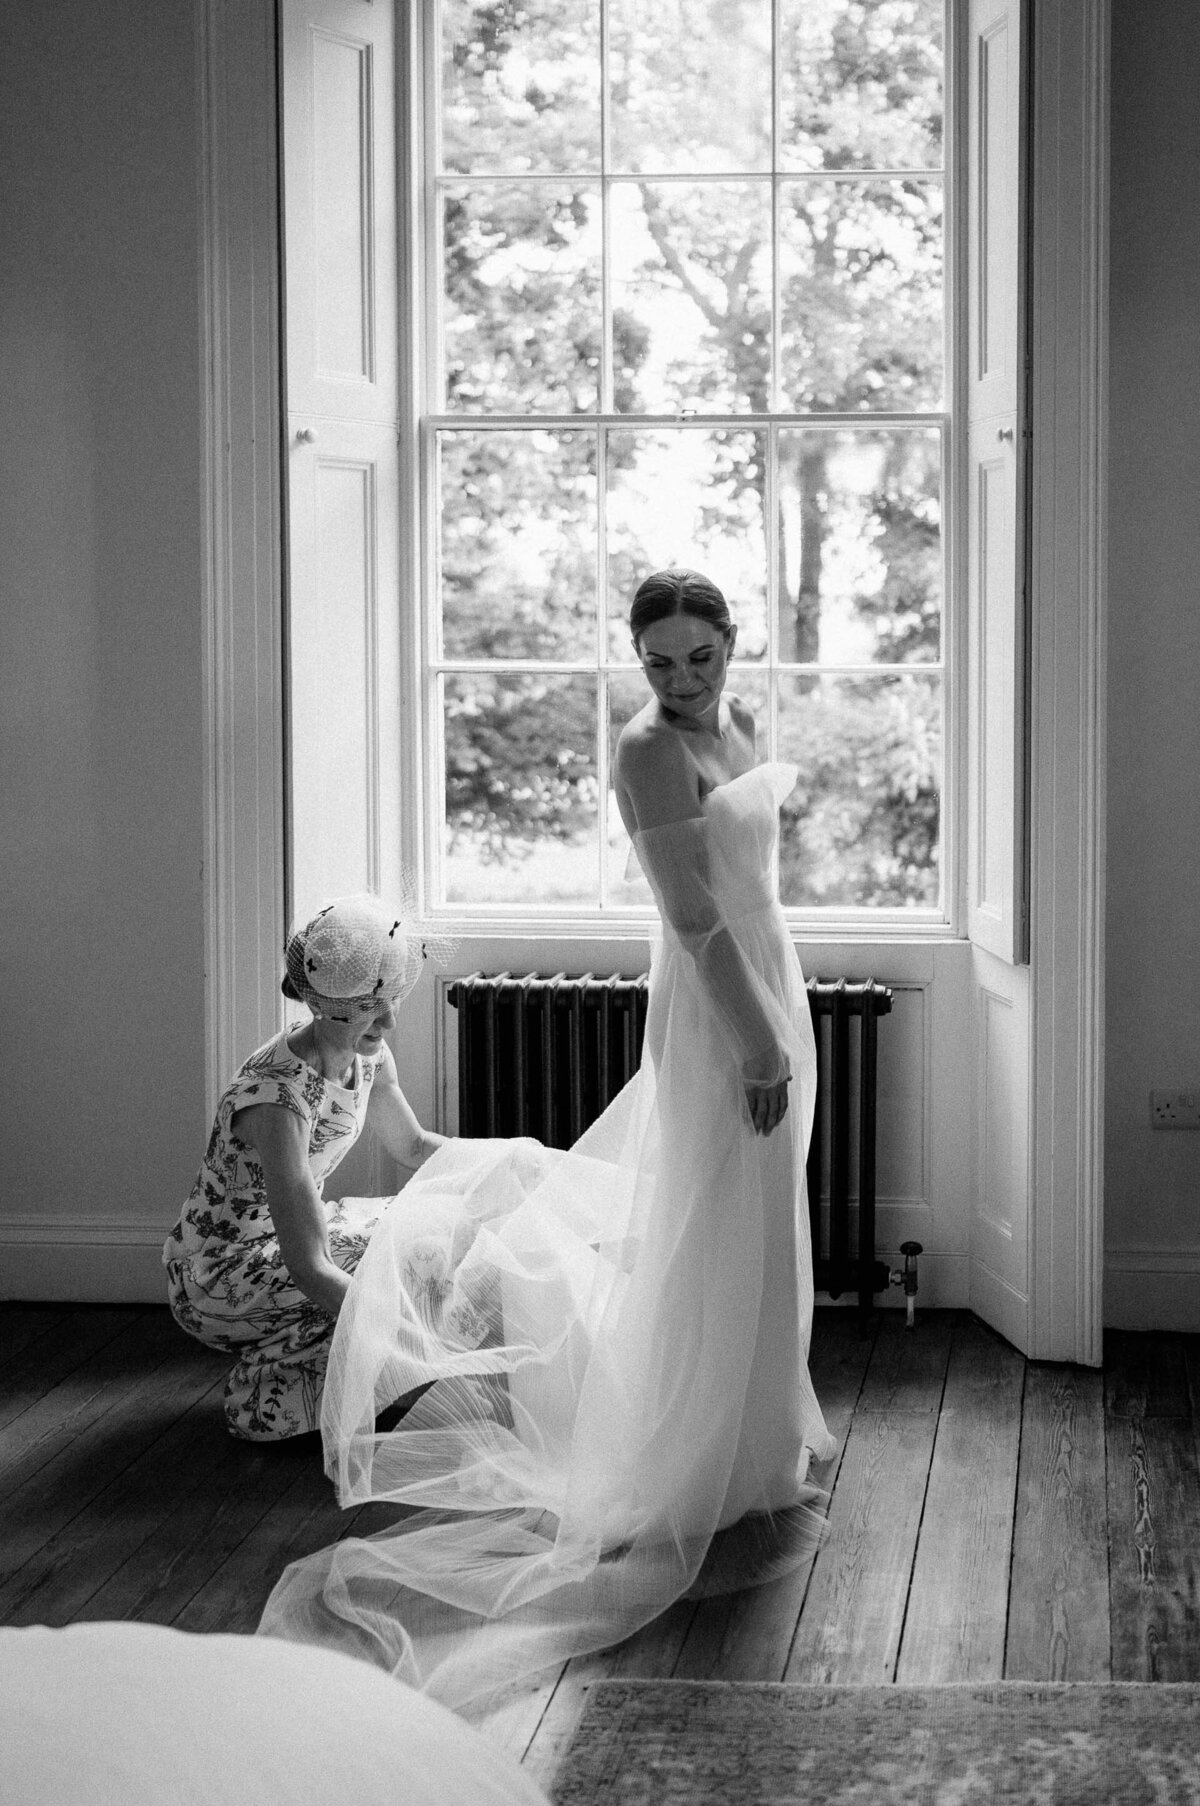 aswarby-rectory-wedding-photographer-linsey-james-laura-williams-photography24